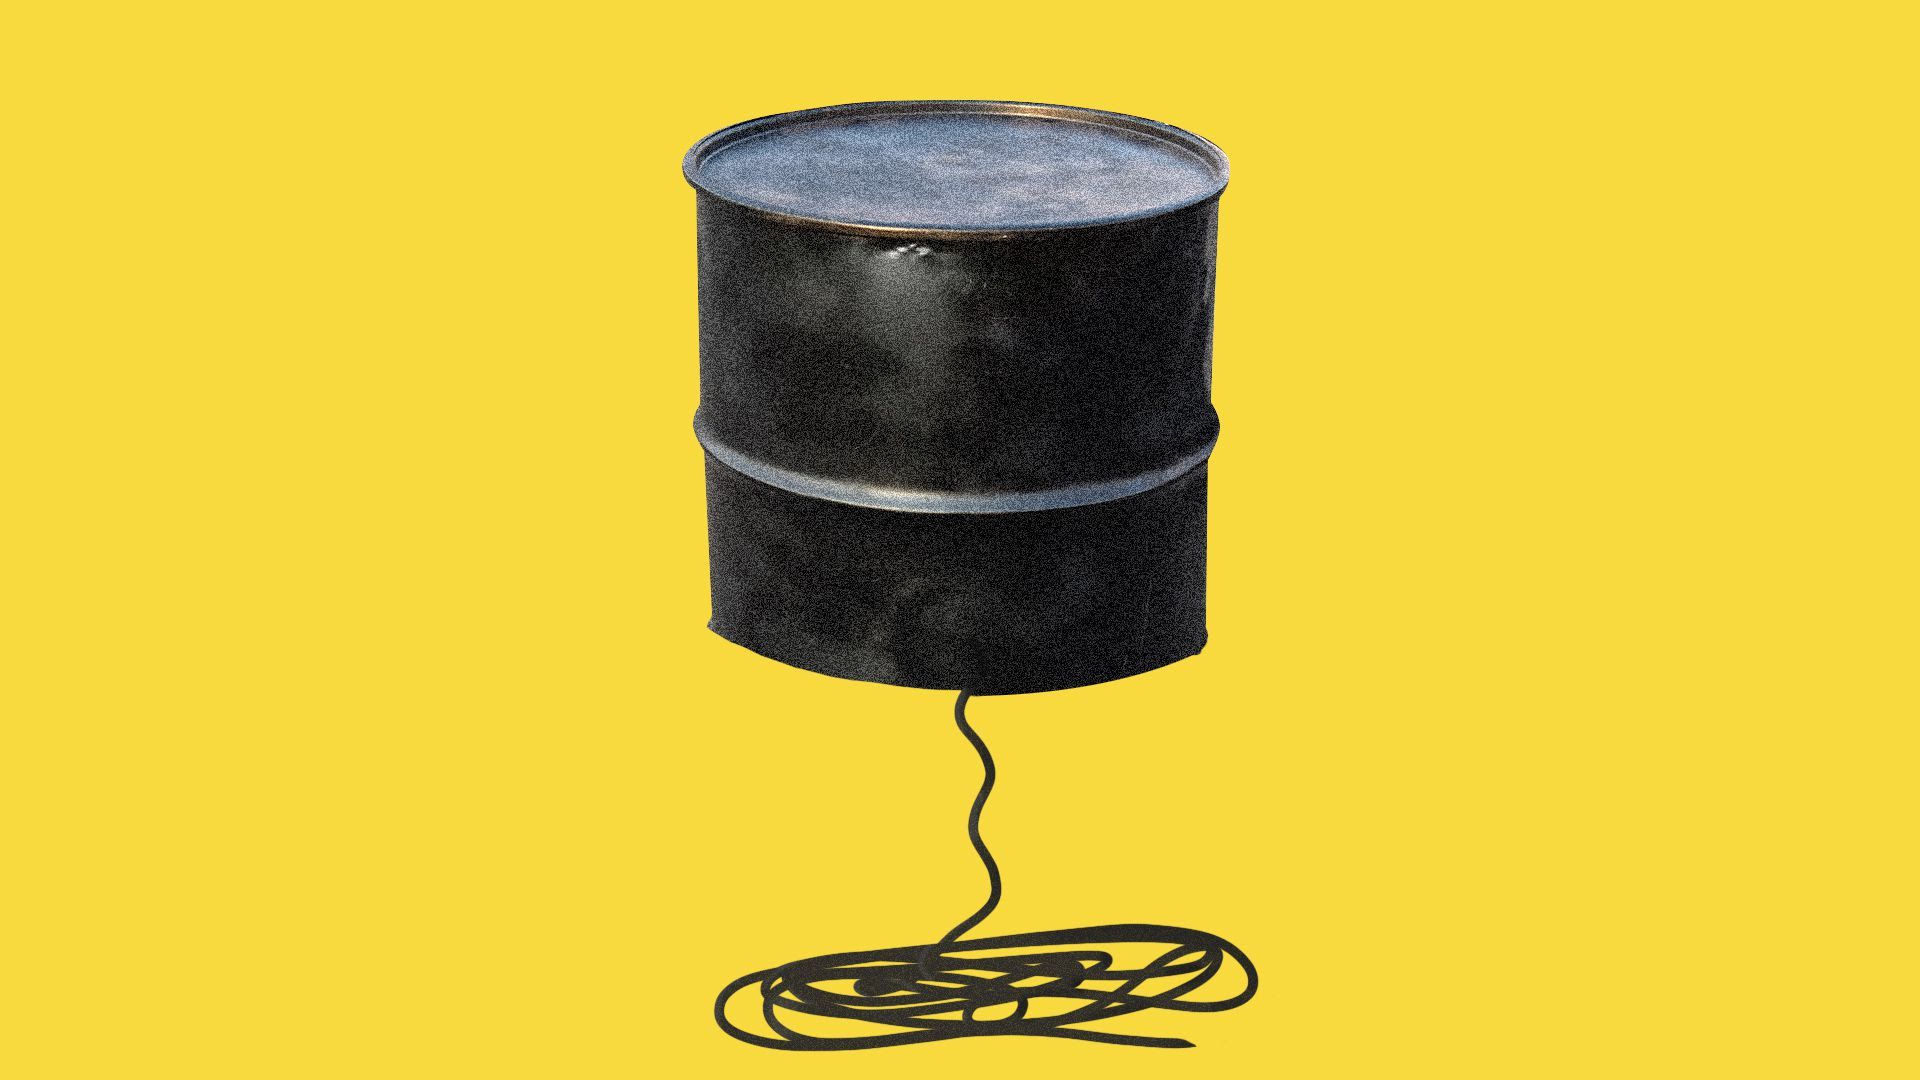 An illustration of an oil barrel unraveling into rope